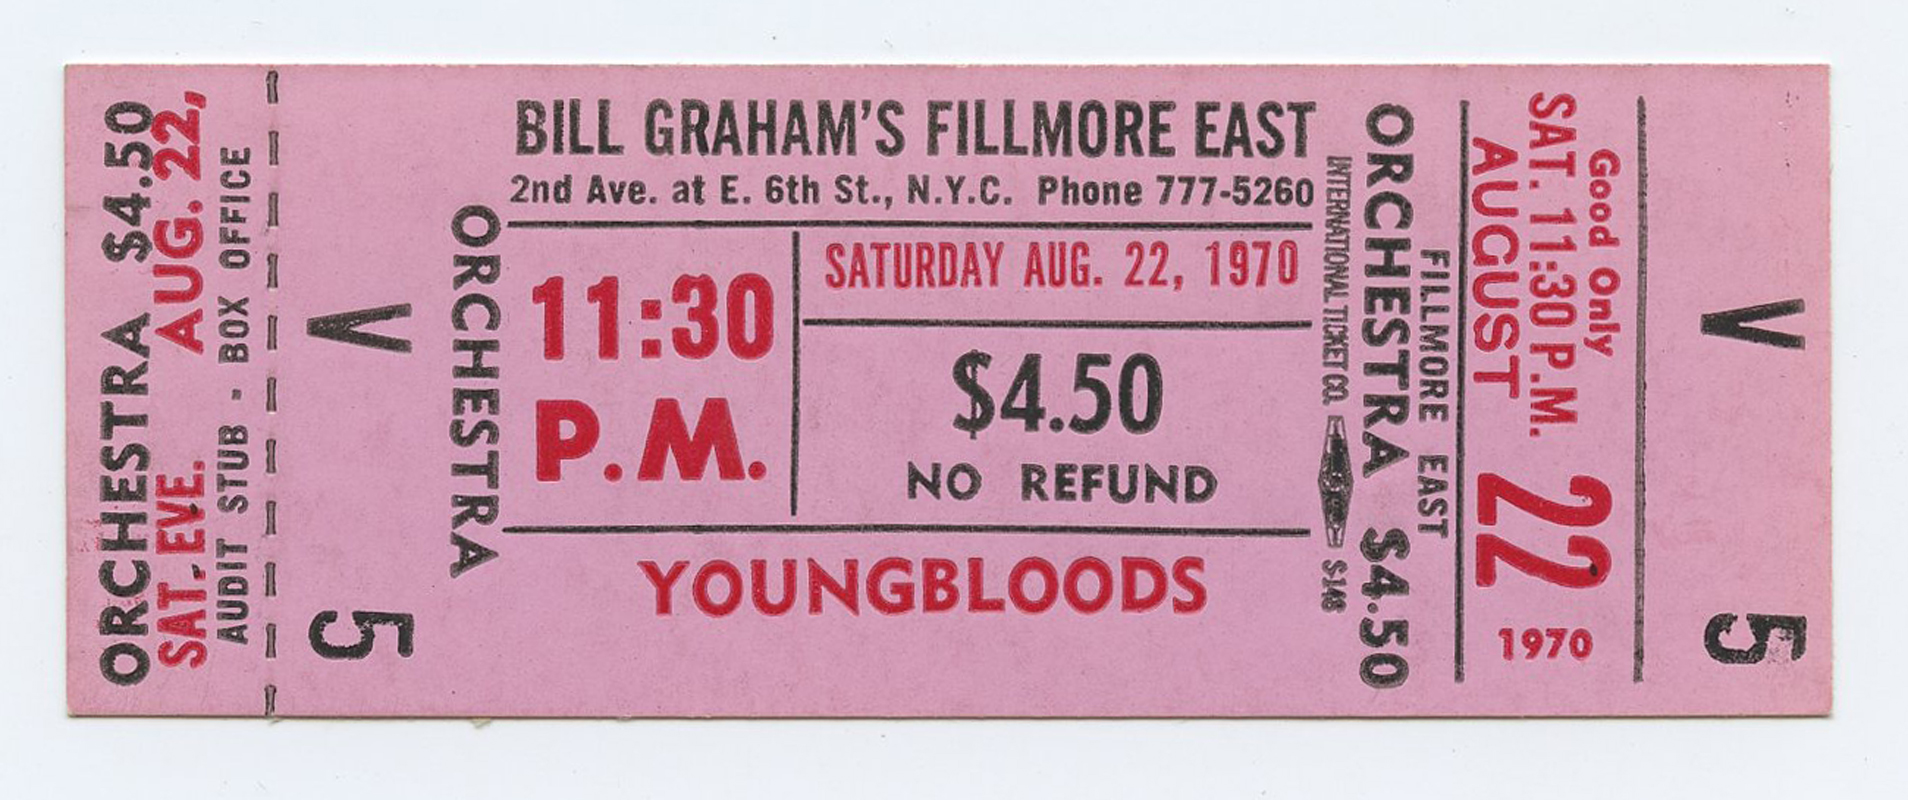 Bill Graham Fillmore East Vintage Ticket 1970 Aug 22 The Youngbloods 